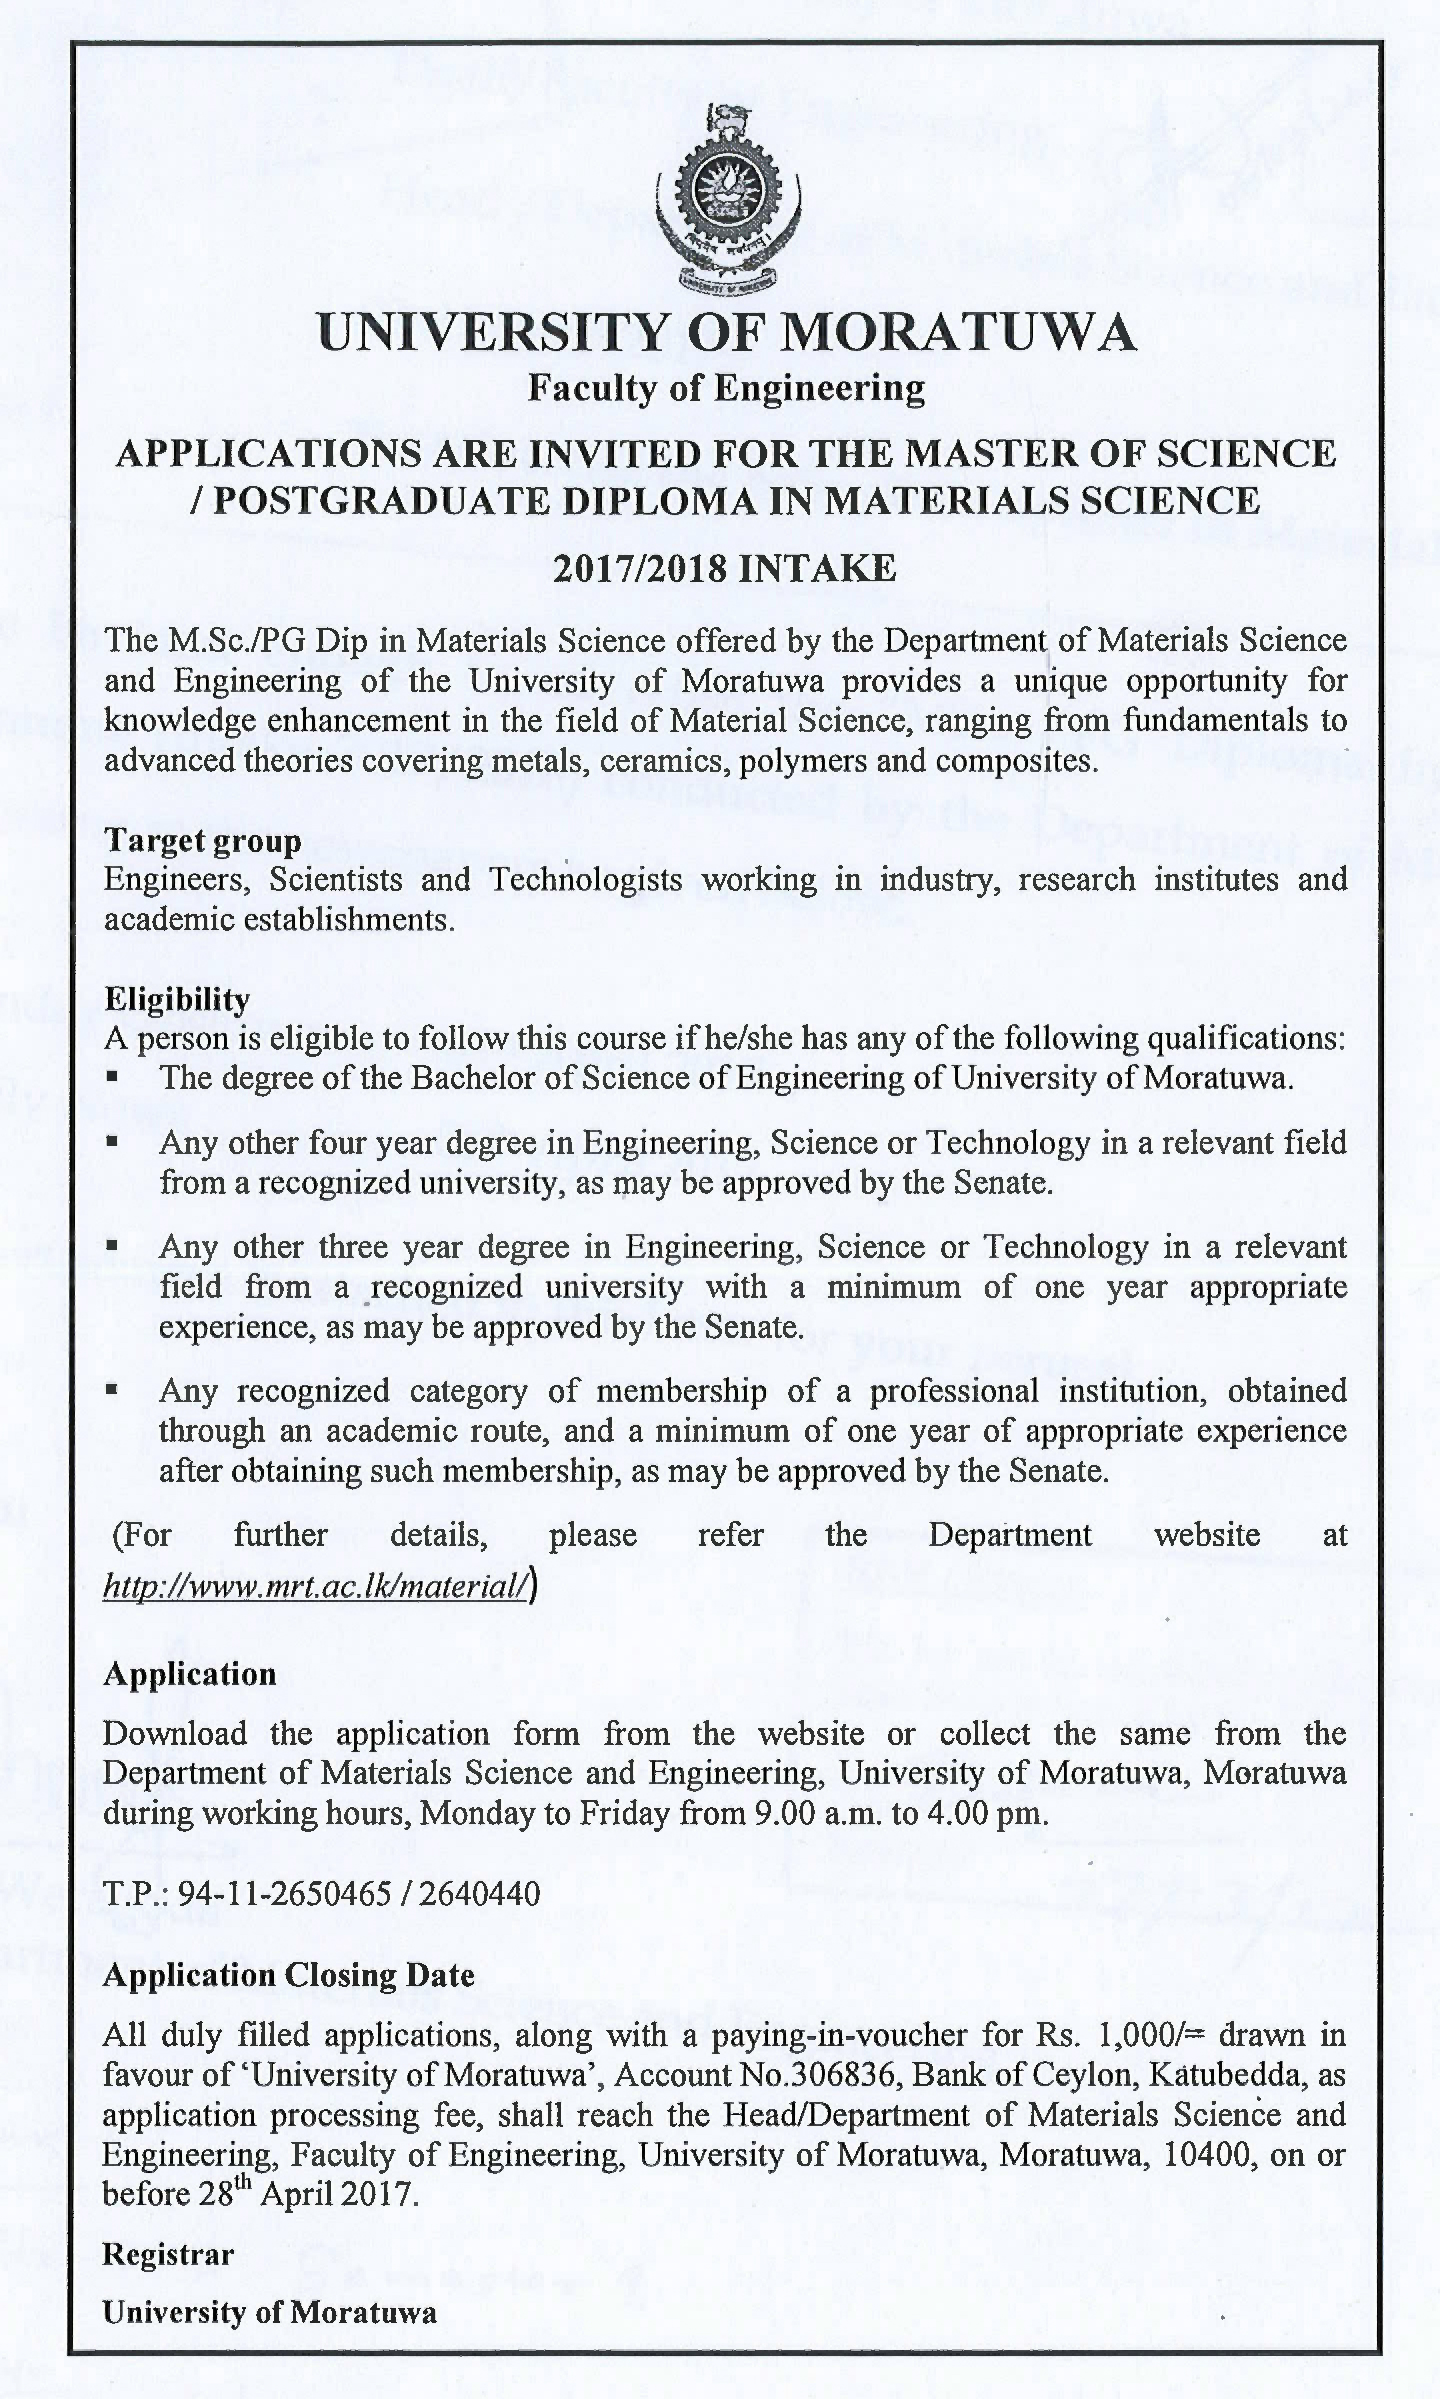 Applications are invited for the Master of Science/ Postgraduate Diploma in Material Science